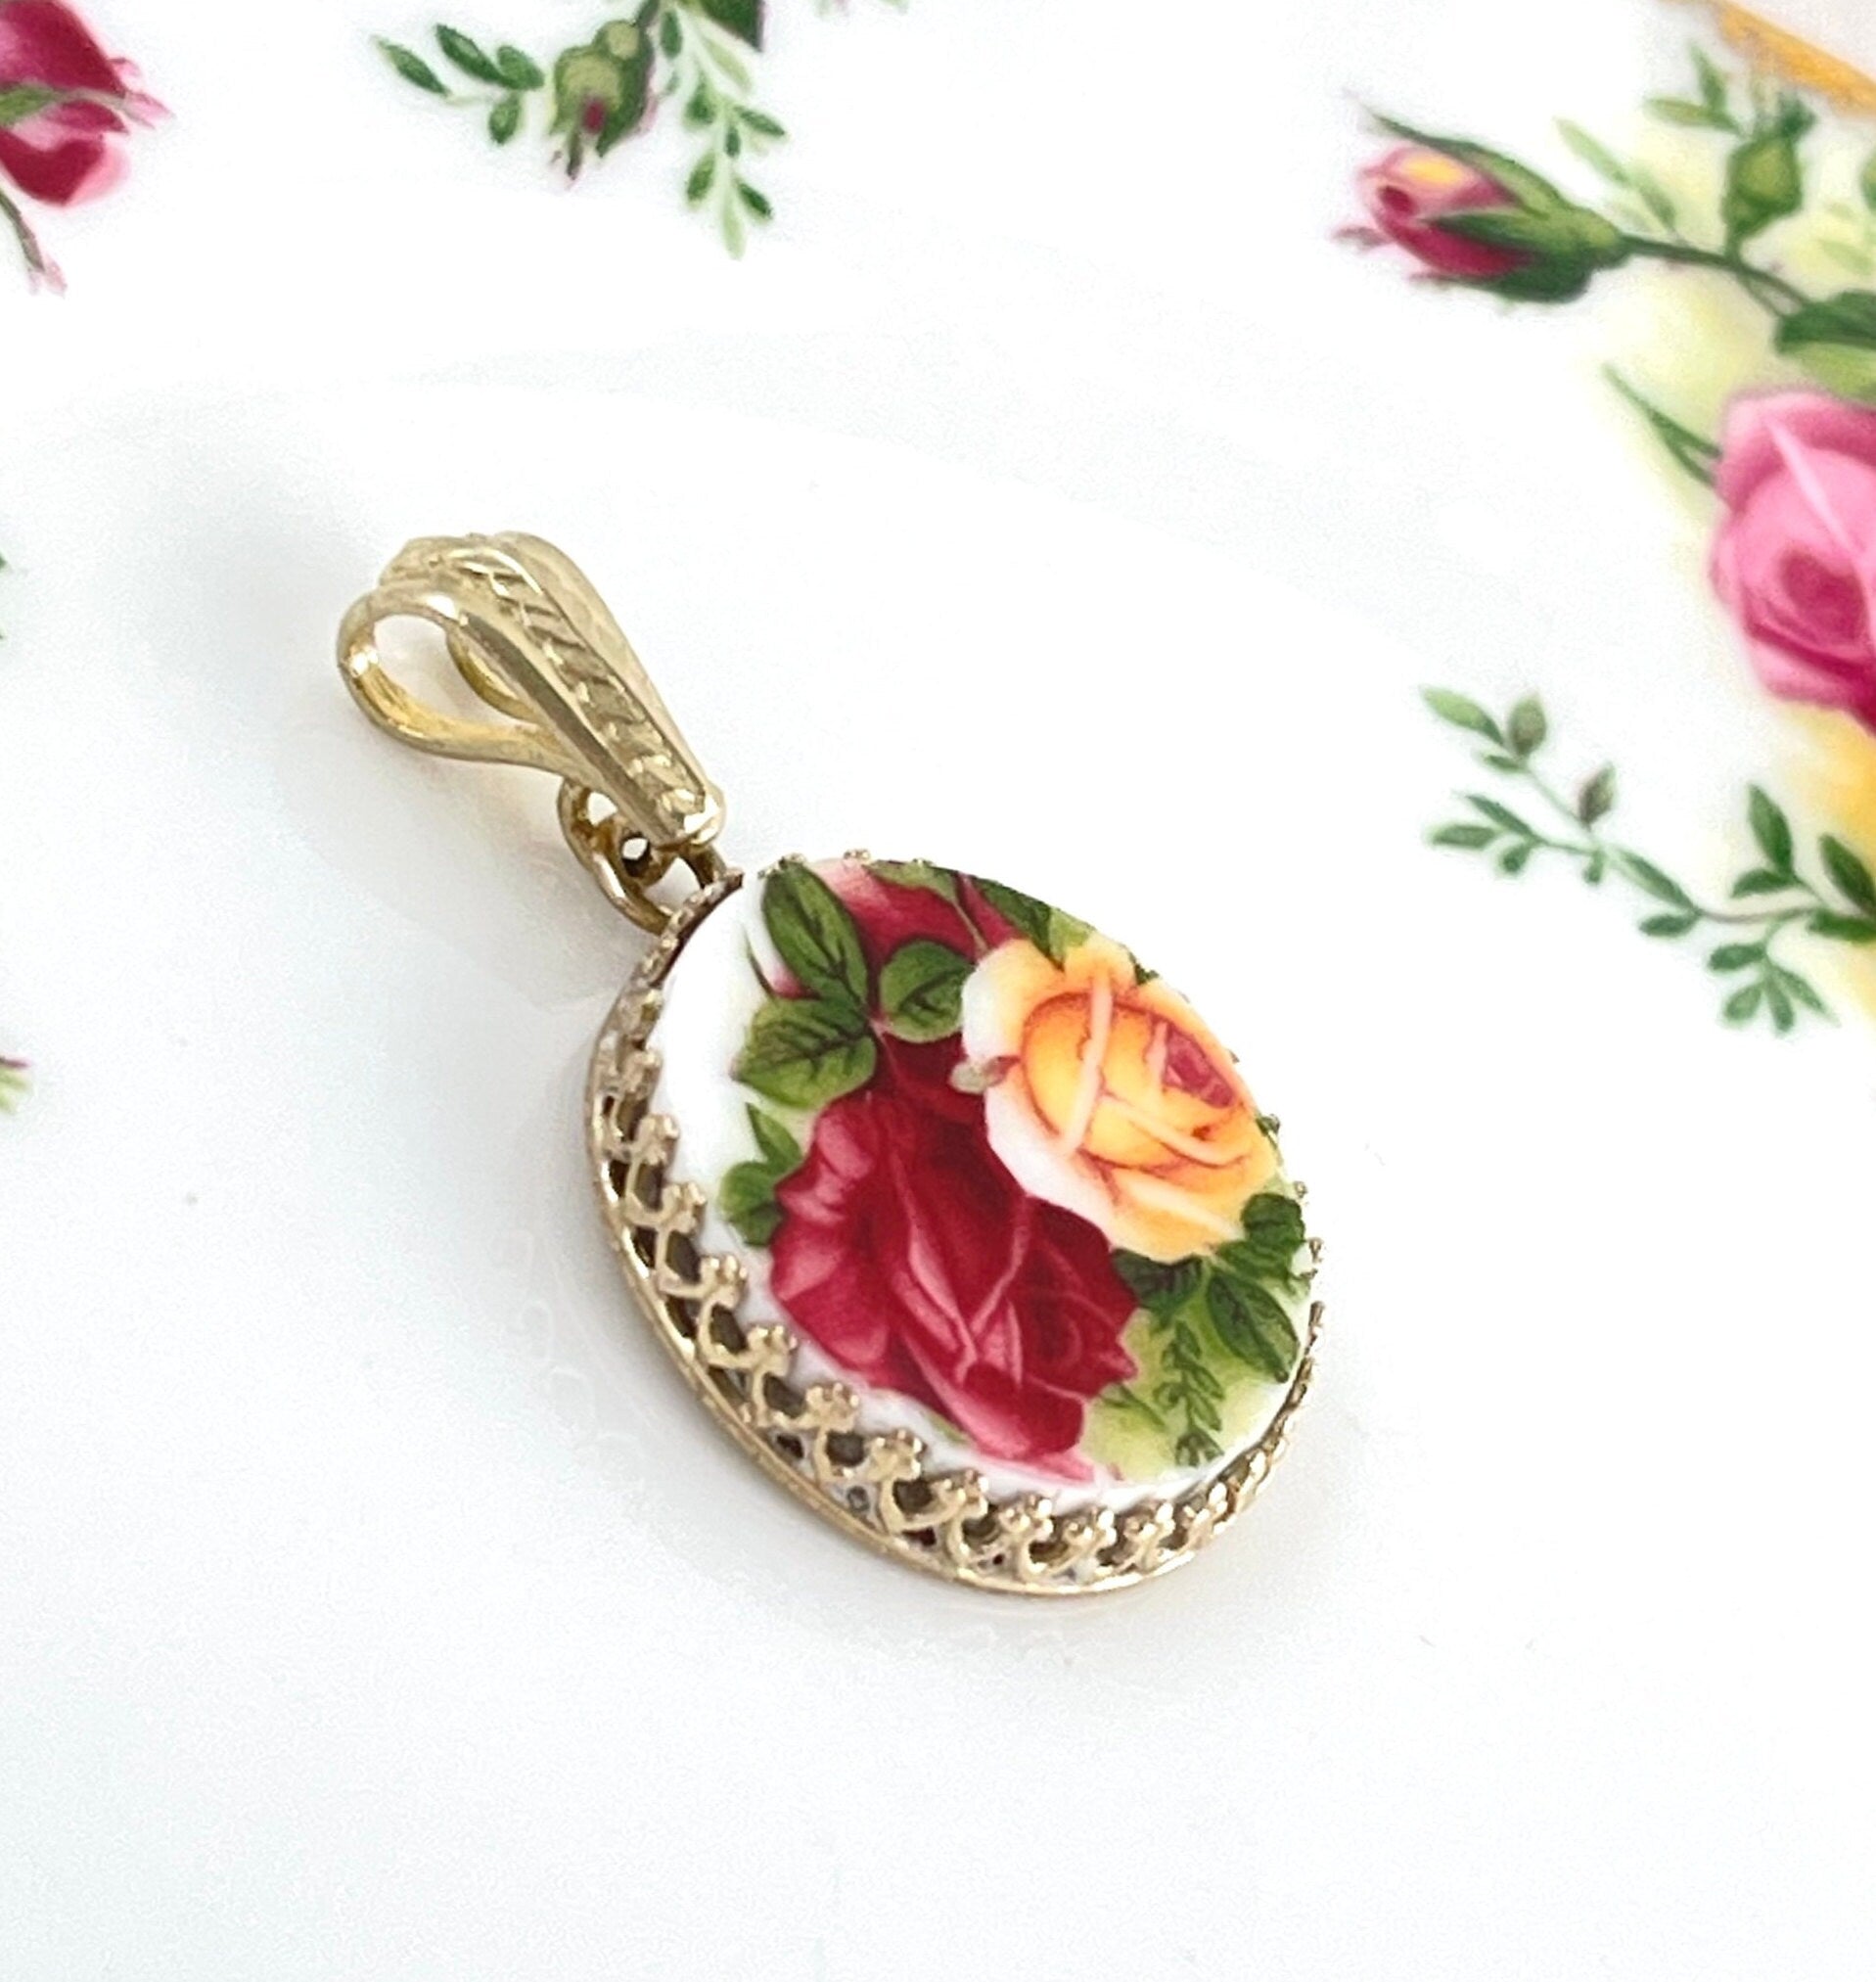 14K Gold Red Rose Broken China Jewelry, Royal Albert Old Country Roses China Necklace, Unique 18th and 20th Anniversary Gift for Wife